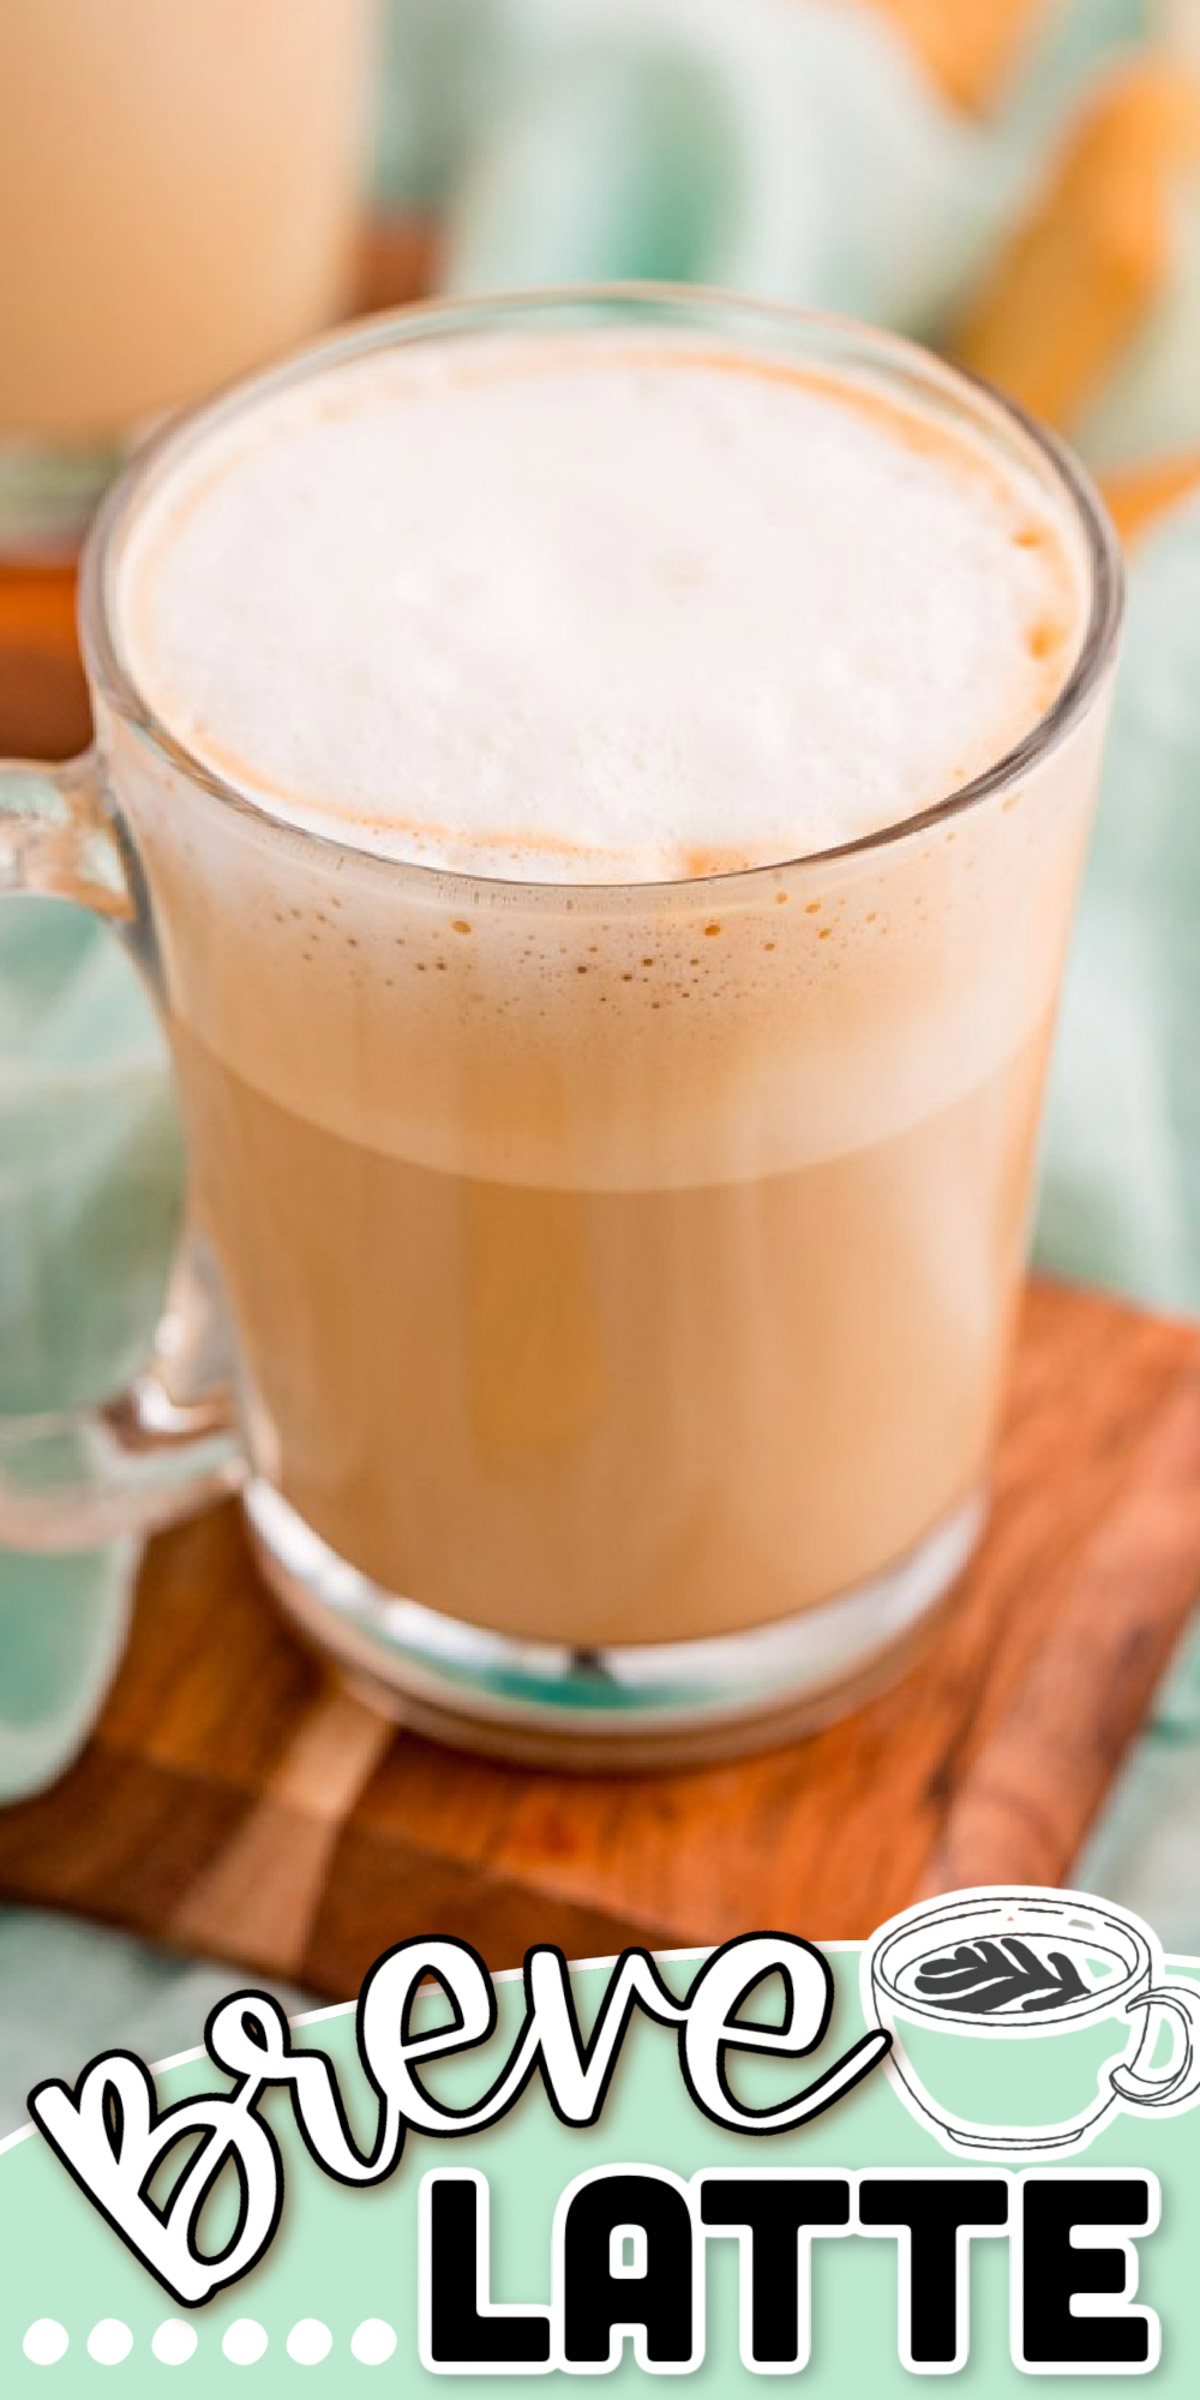 This Latte Breve Coffee Recipe is a 2-ingredient, 5-minute recipe that’s an easy switch up to your coffee routine. You’ll love the simplicity of this rich coffee drink! via @sugarandsoulco